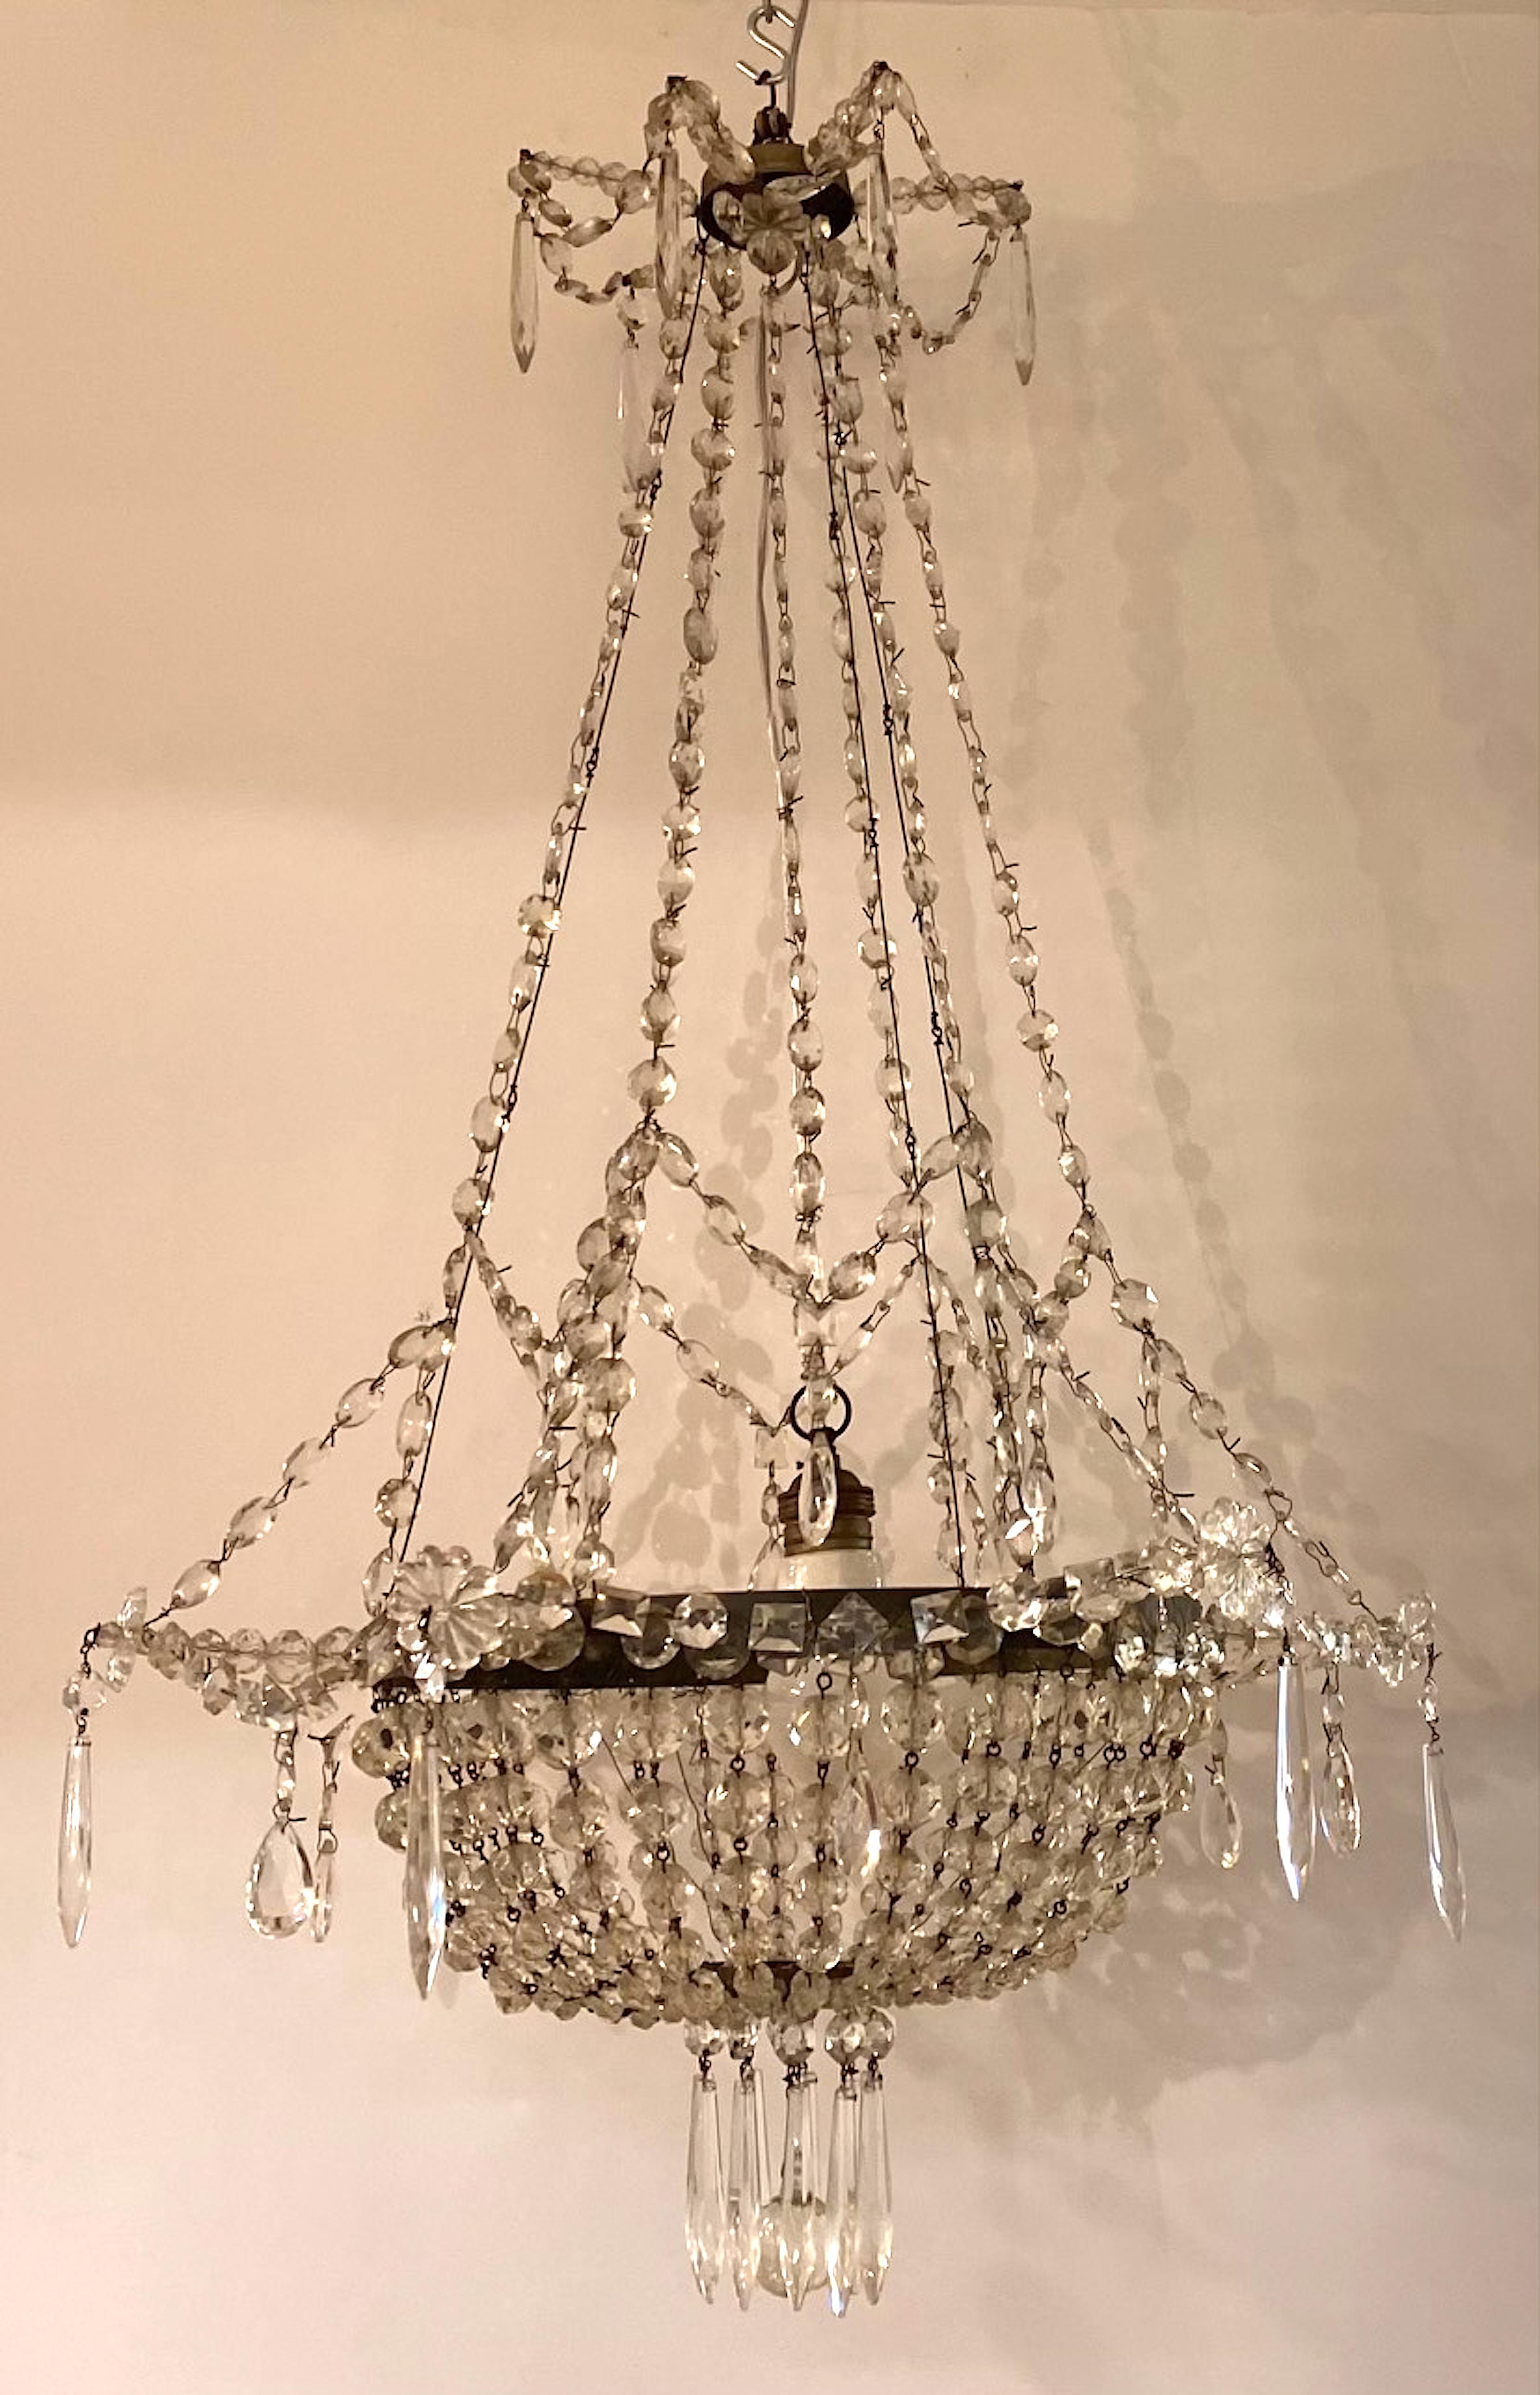 Early 20th Century ca. 1900 French Campaigne iron and crystal chandelier.
1 standart socket.